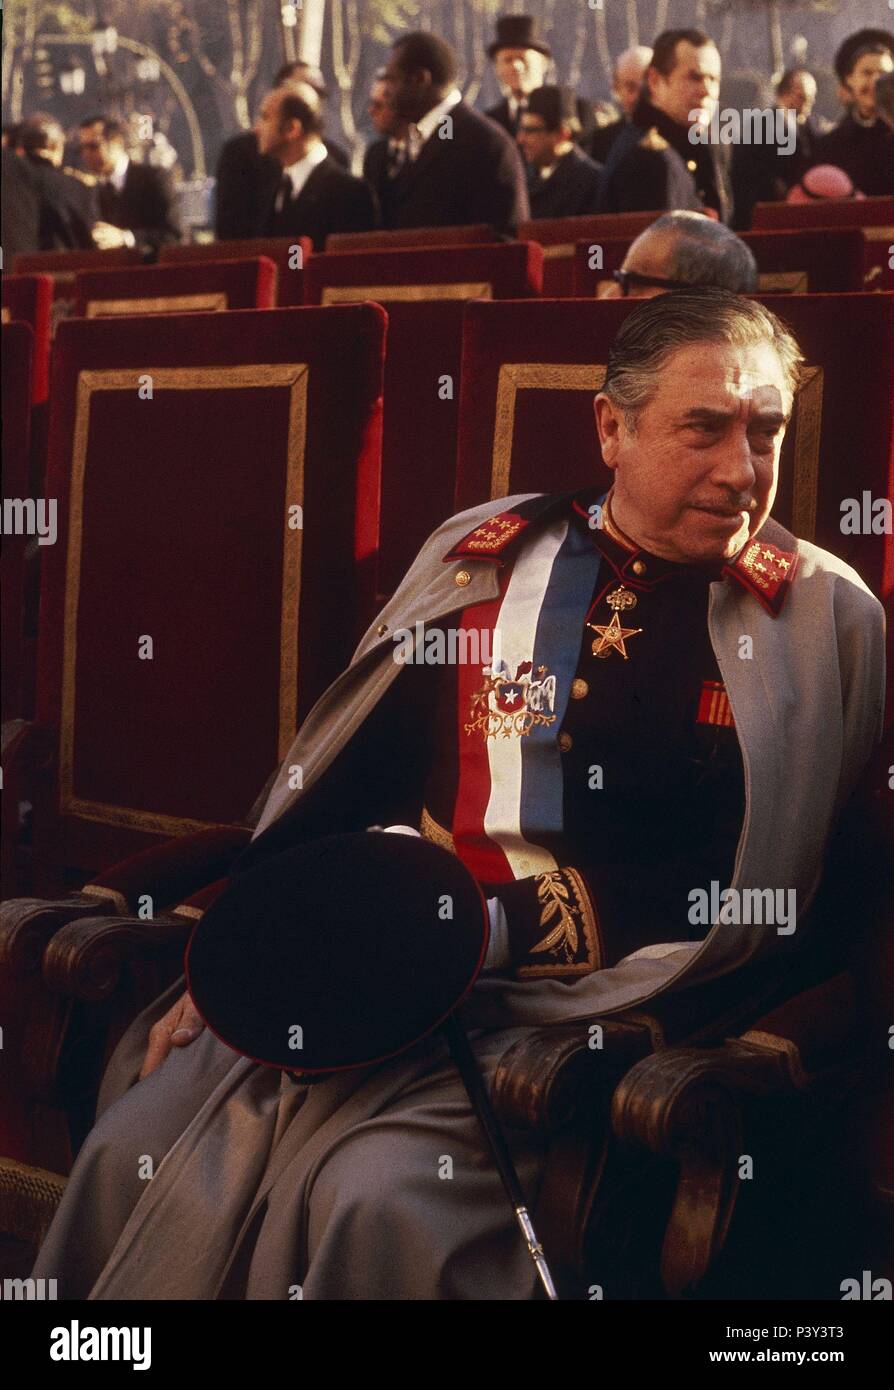 Augusto Pinochet during the ceremony of the oath of Juan Carlos. November 22, 1975. Madrid, Congress of Deputies. Stock Photo